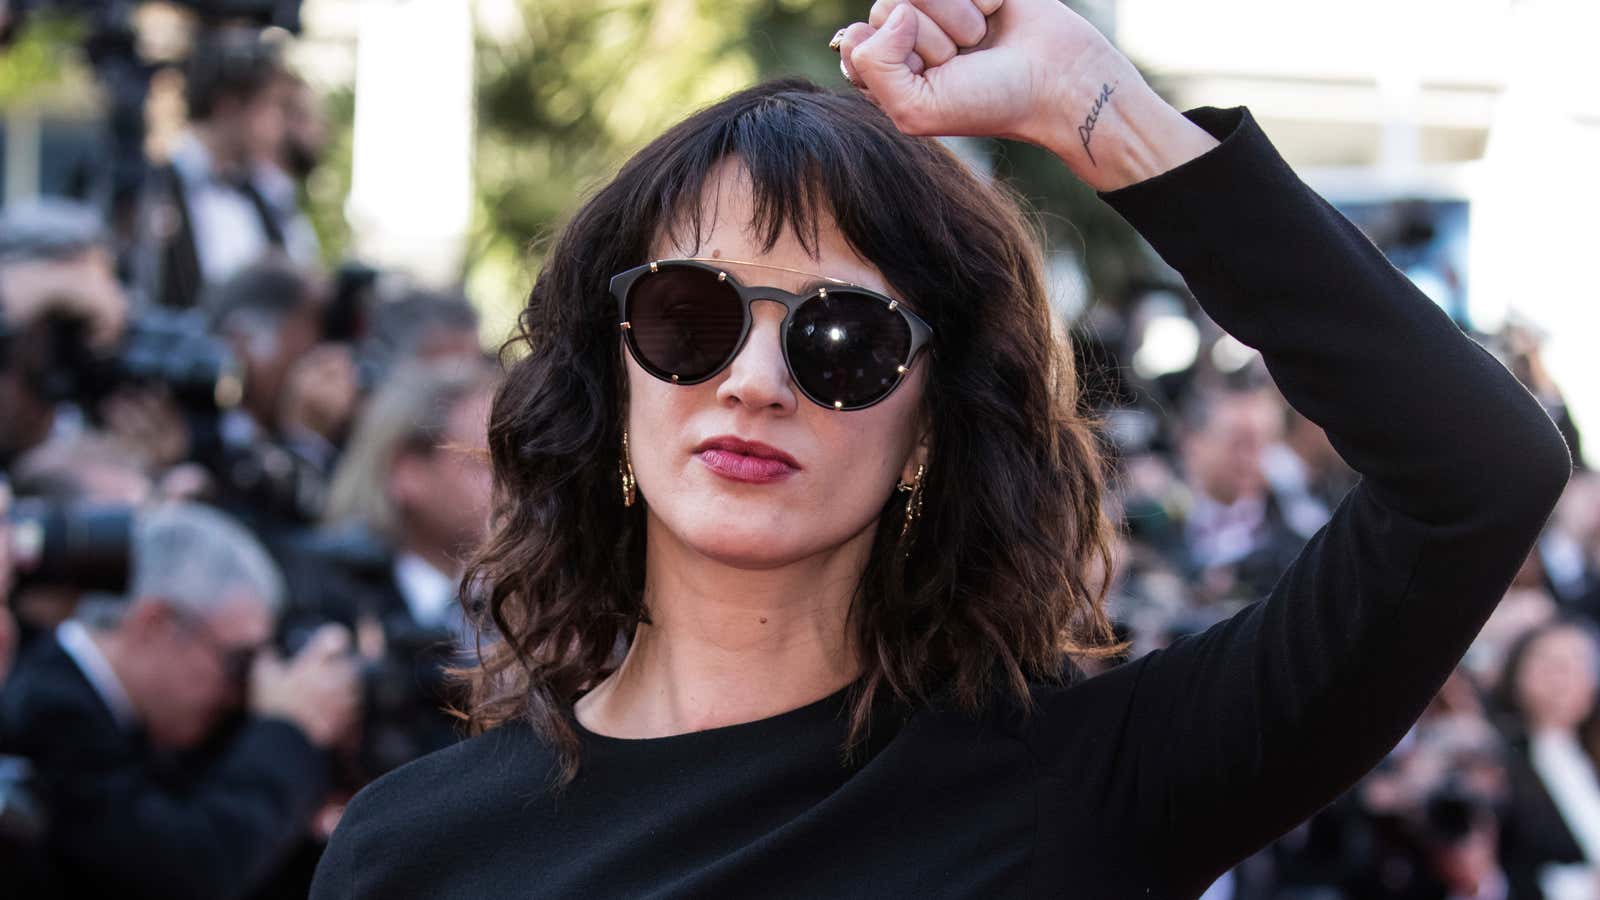 Argento is accused of the crime she has raised awareness of.